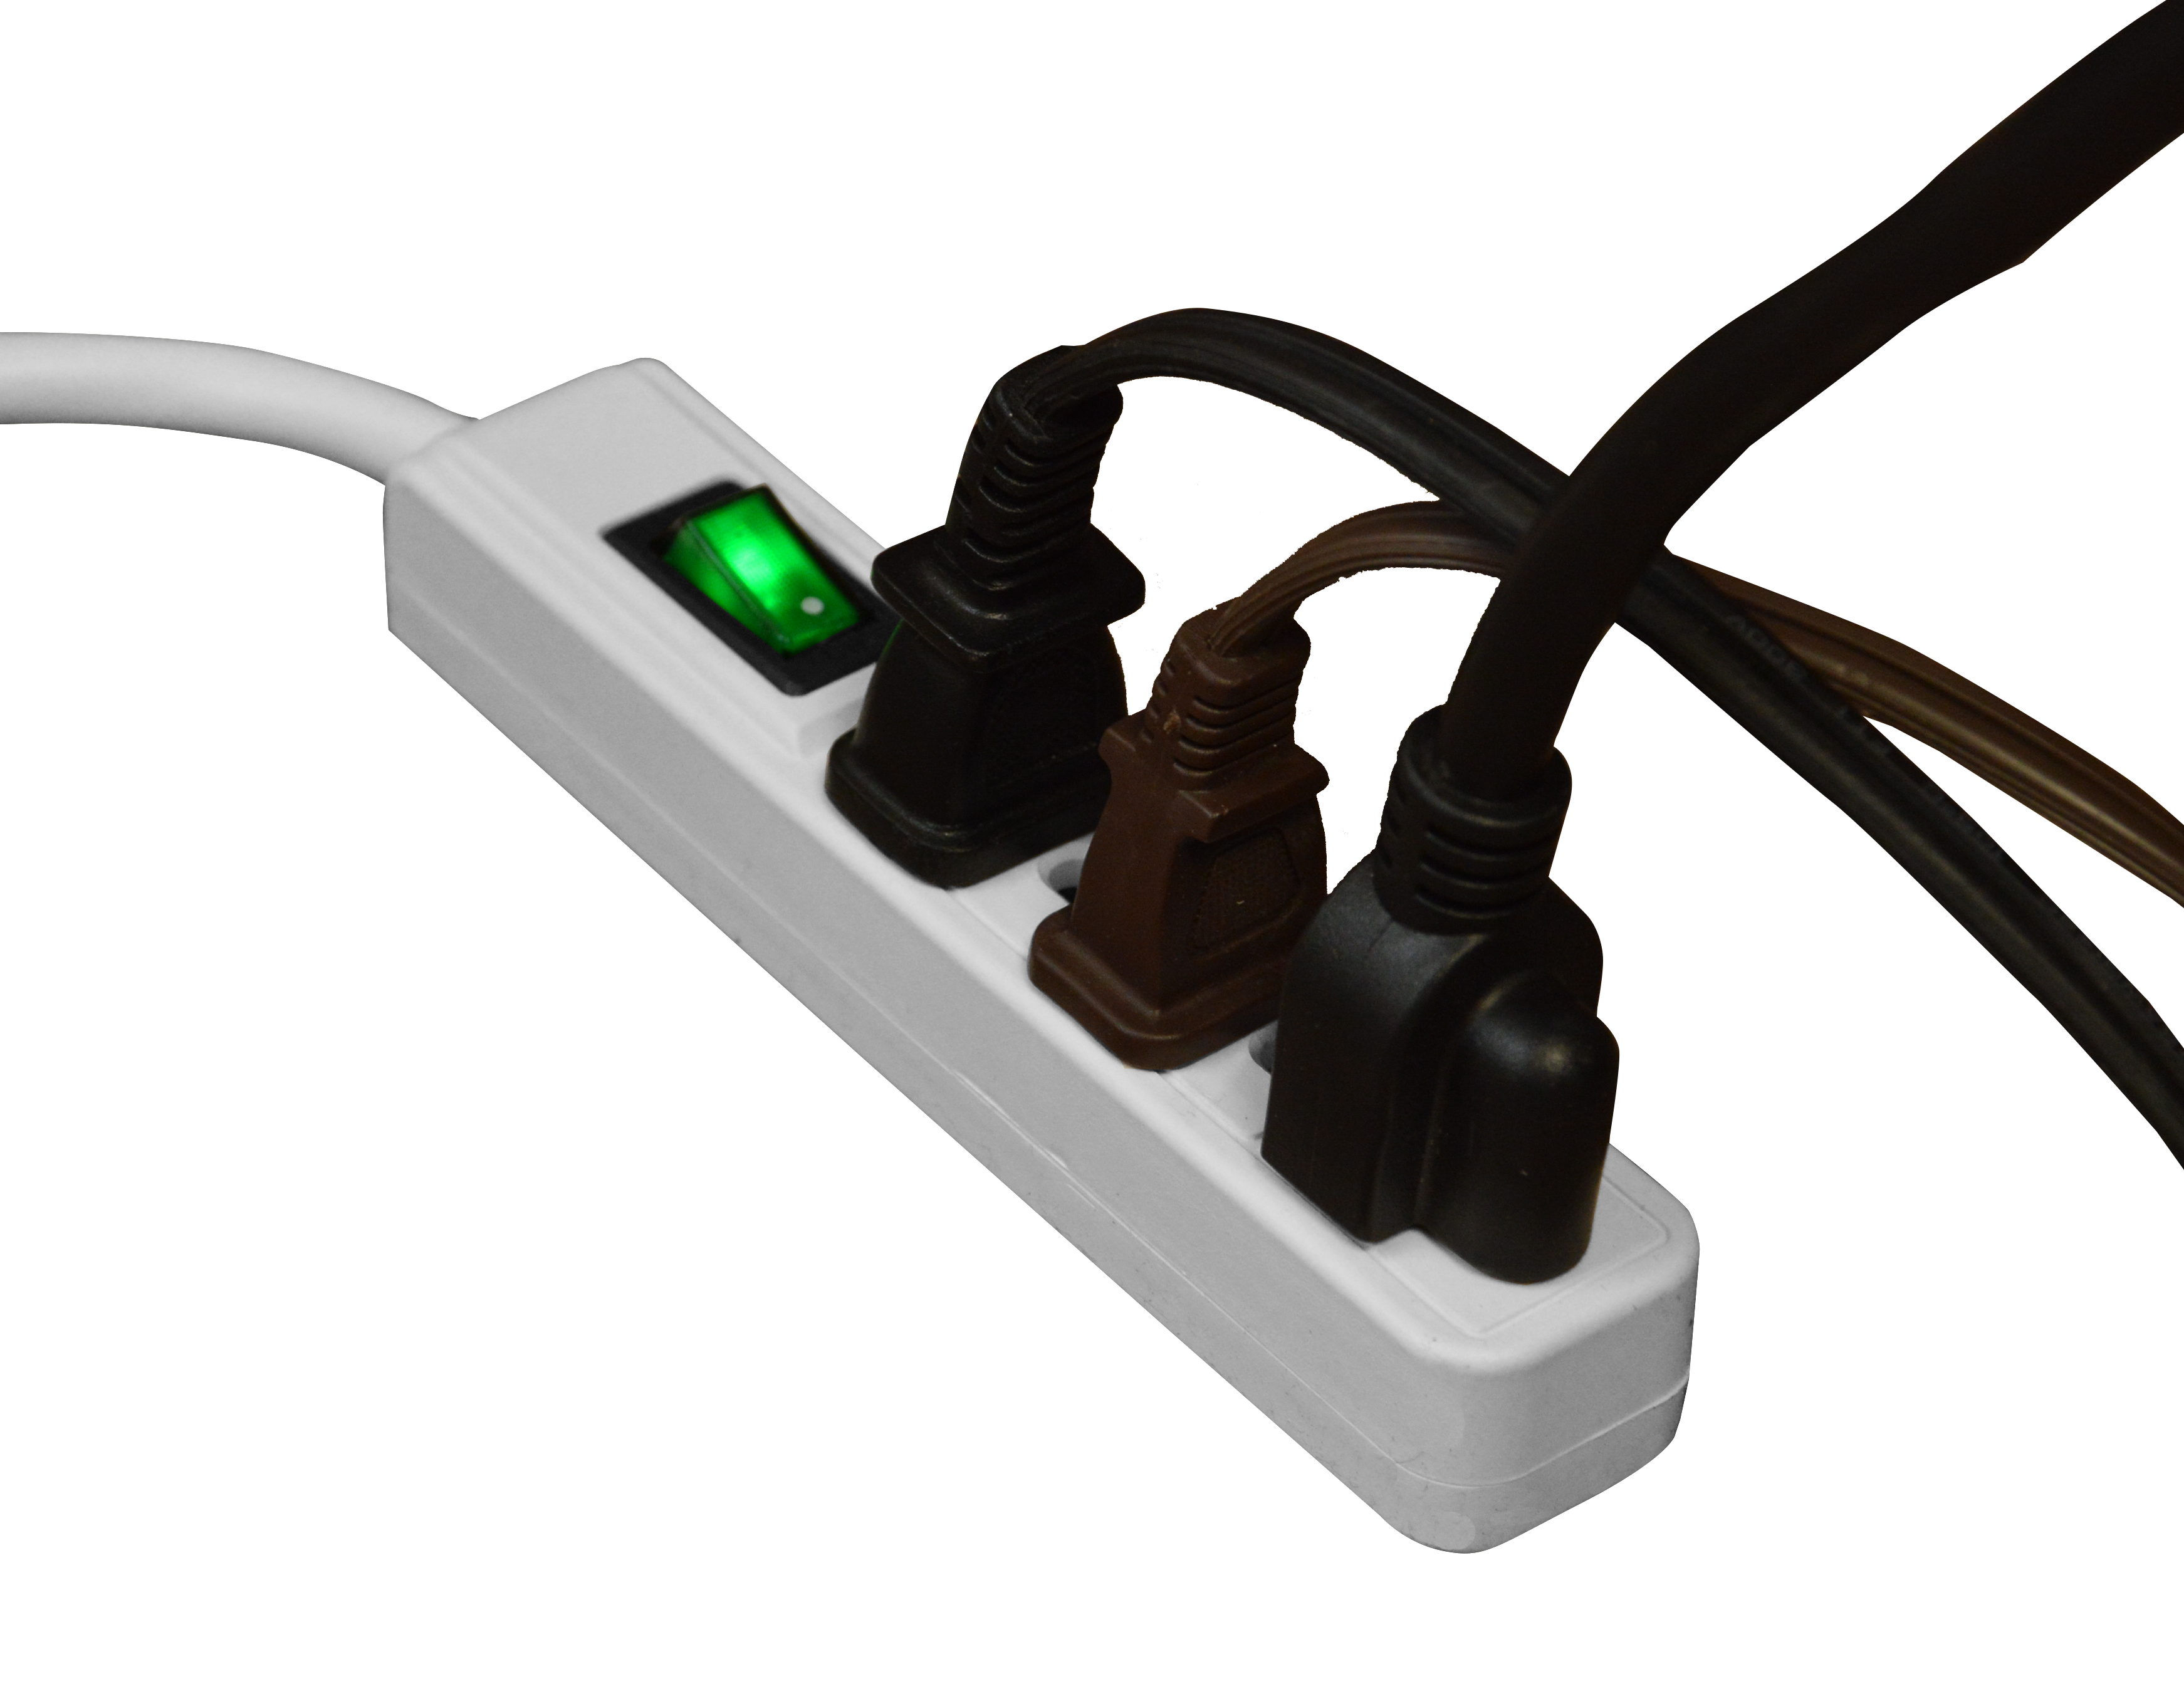 GoGreen Power (GG-13002MS) 3 Outlet Power Strip, White, 2.5 Ft Cord - image 3 of 4